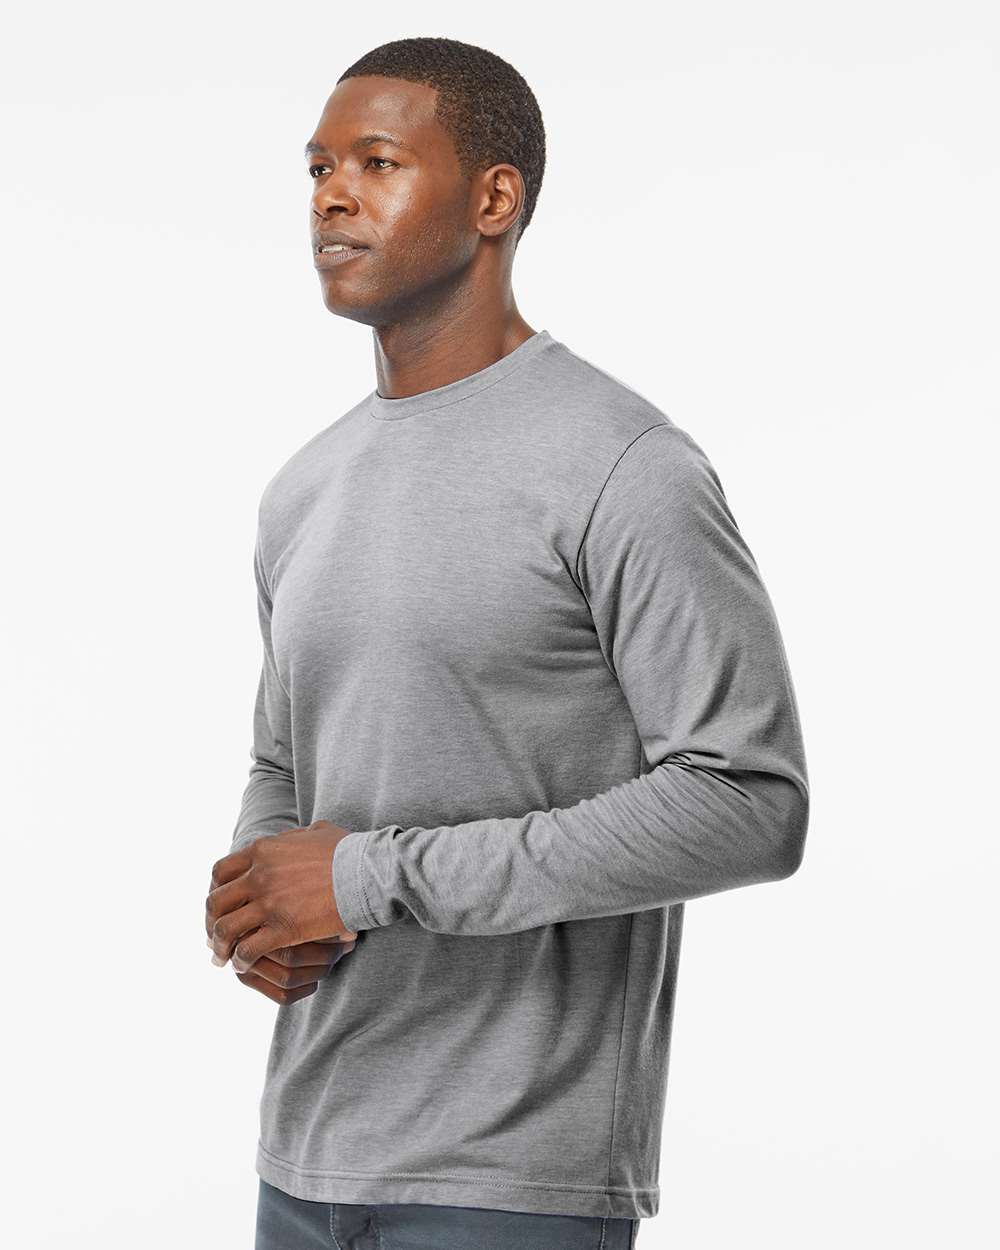 M&O Poly-Blend Long Sleeve T-Shirt 3520 #colormdl_Heather Grey